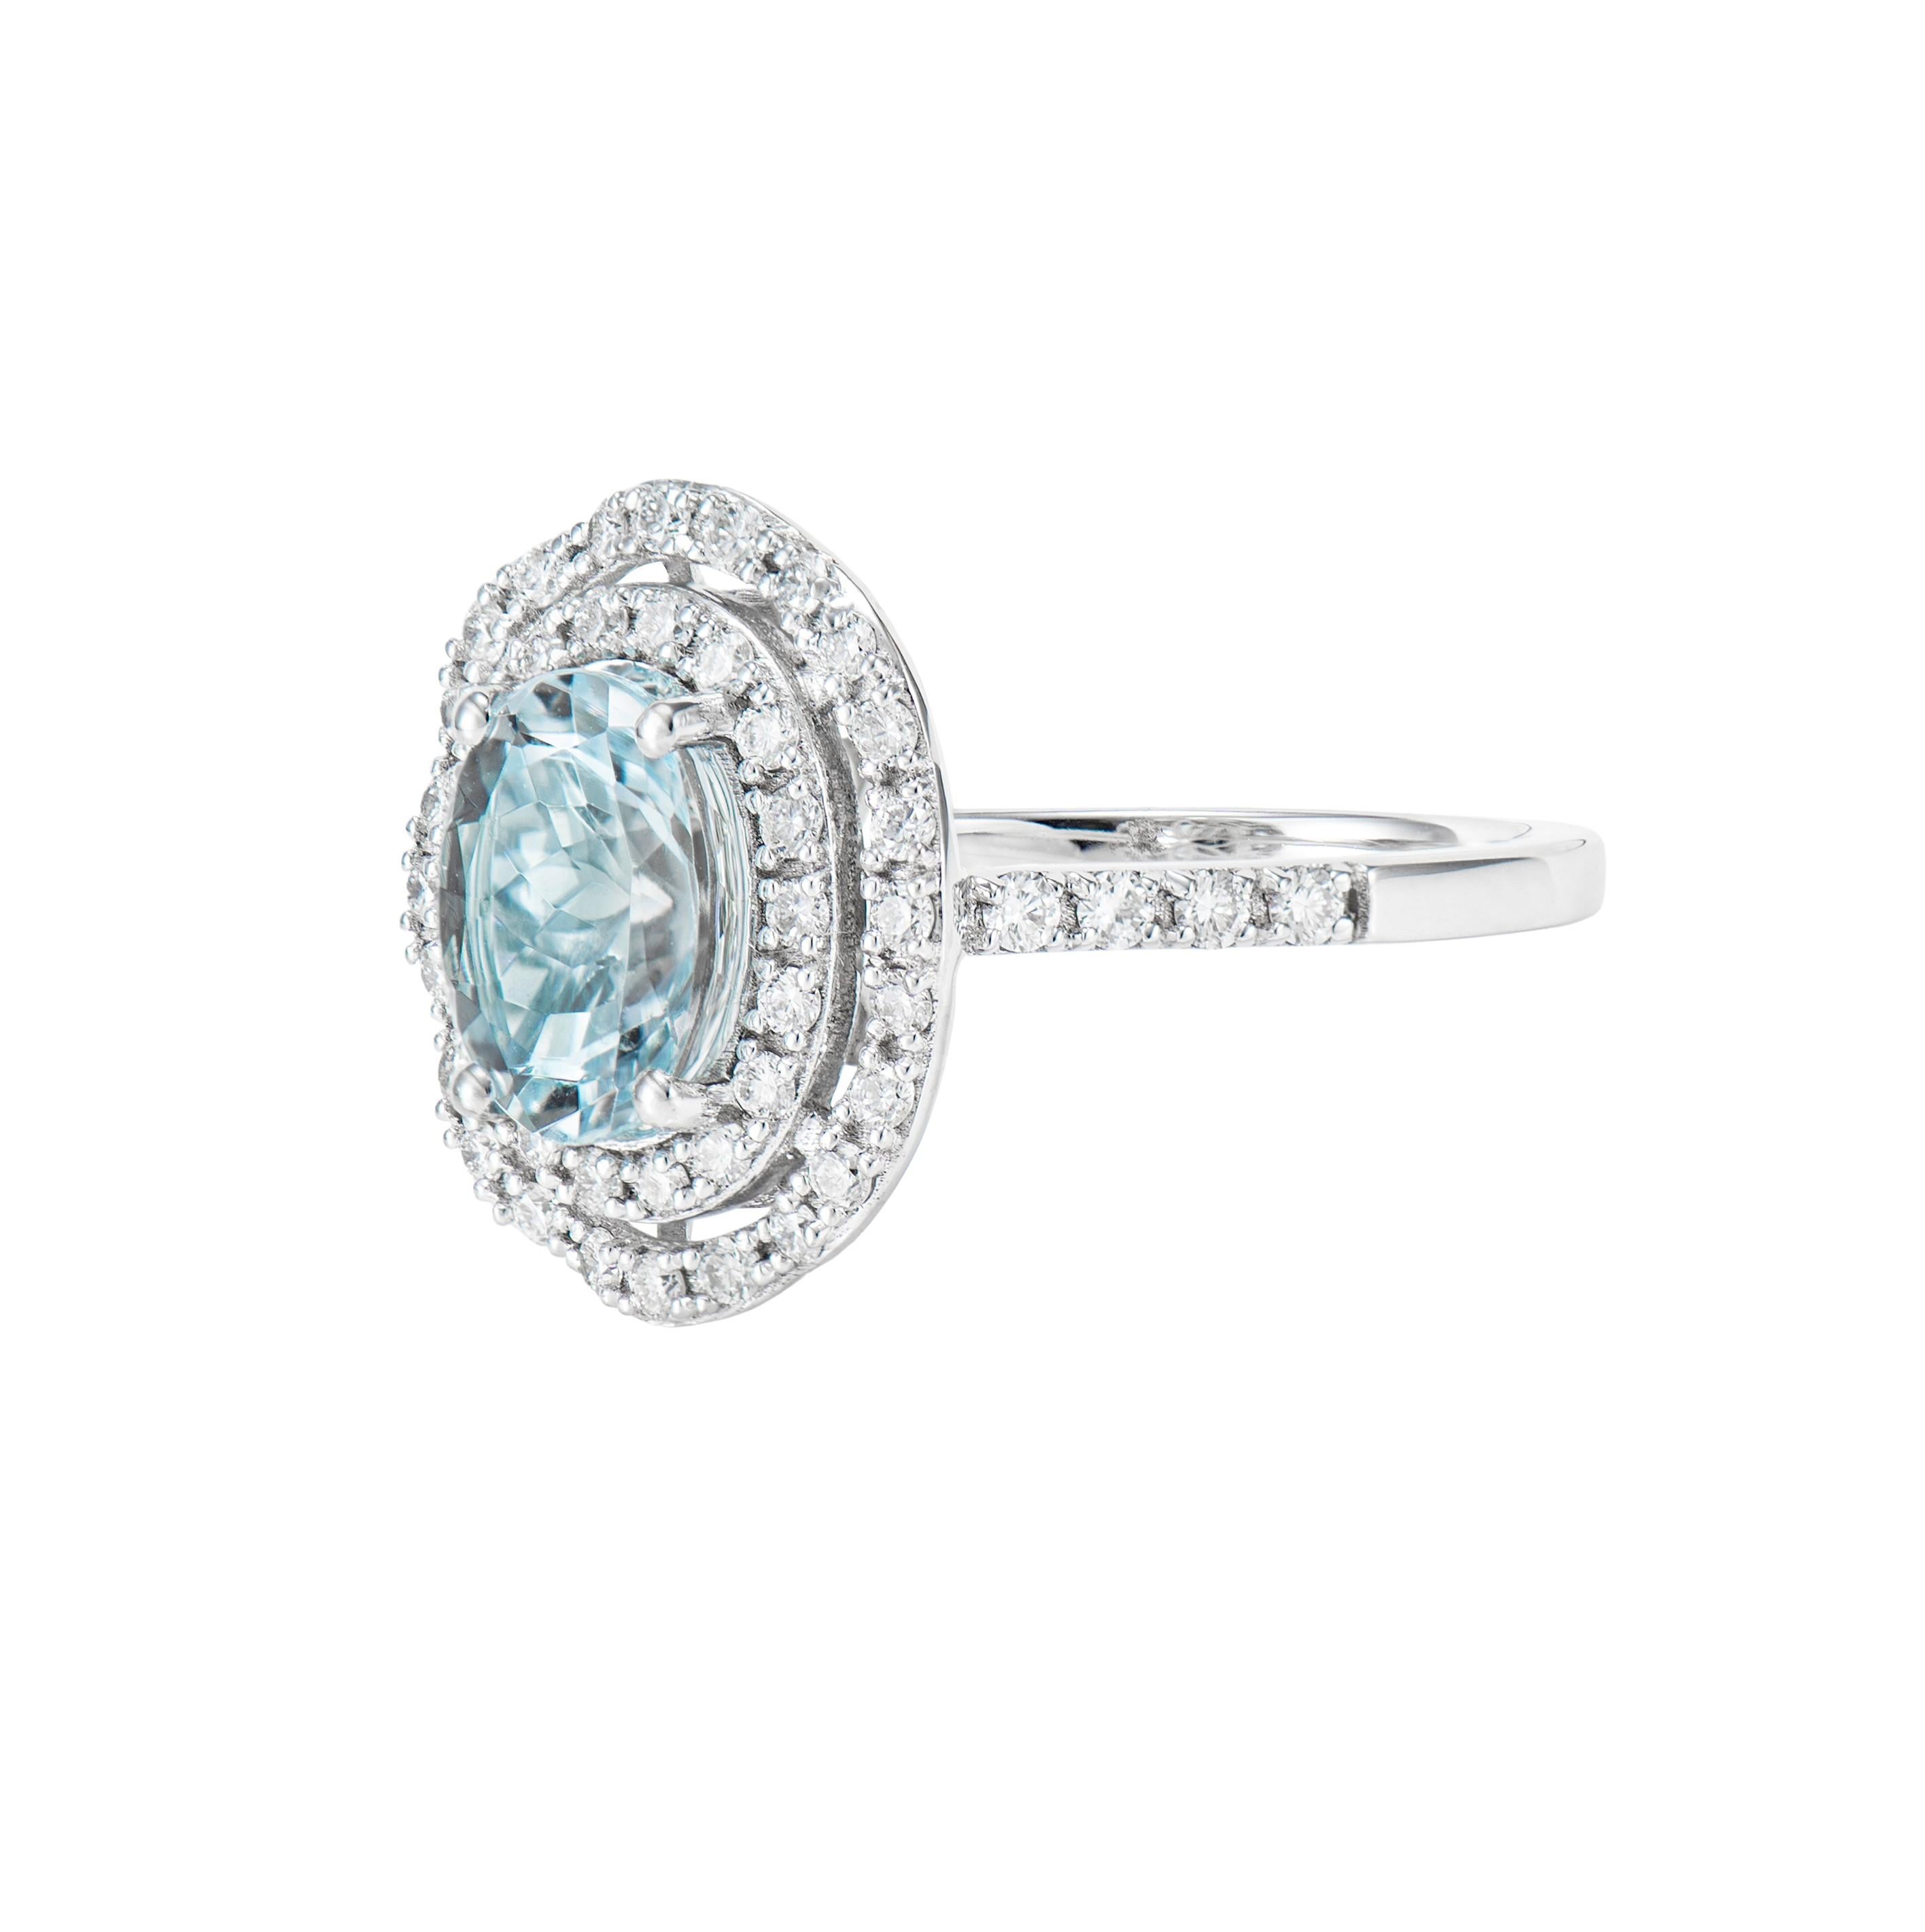 Oval Cut Aquamarine and White Diamond Ring in 18 Karat White Gold. For Sale